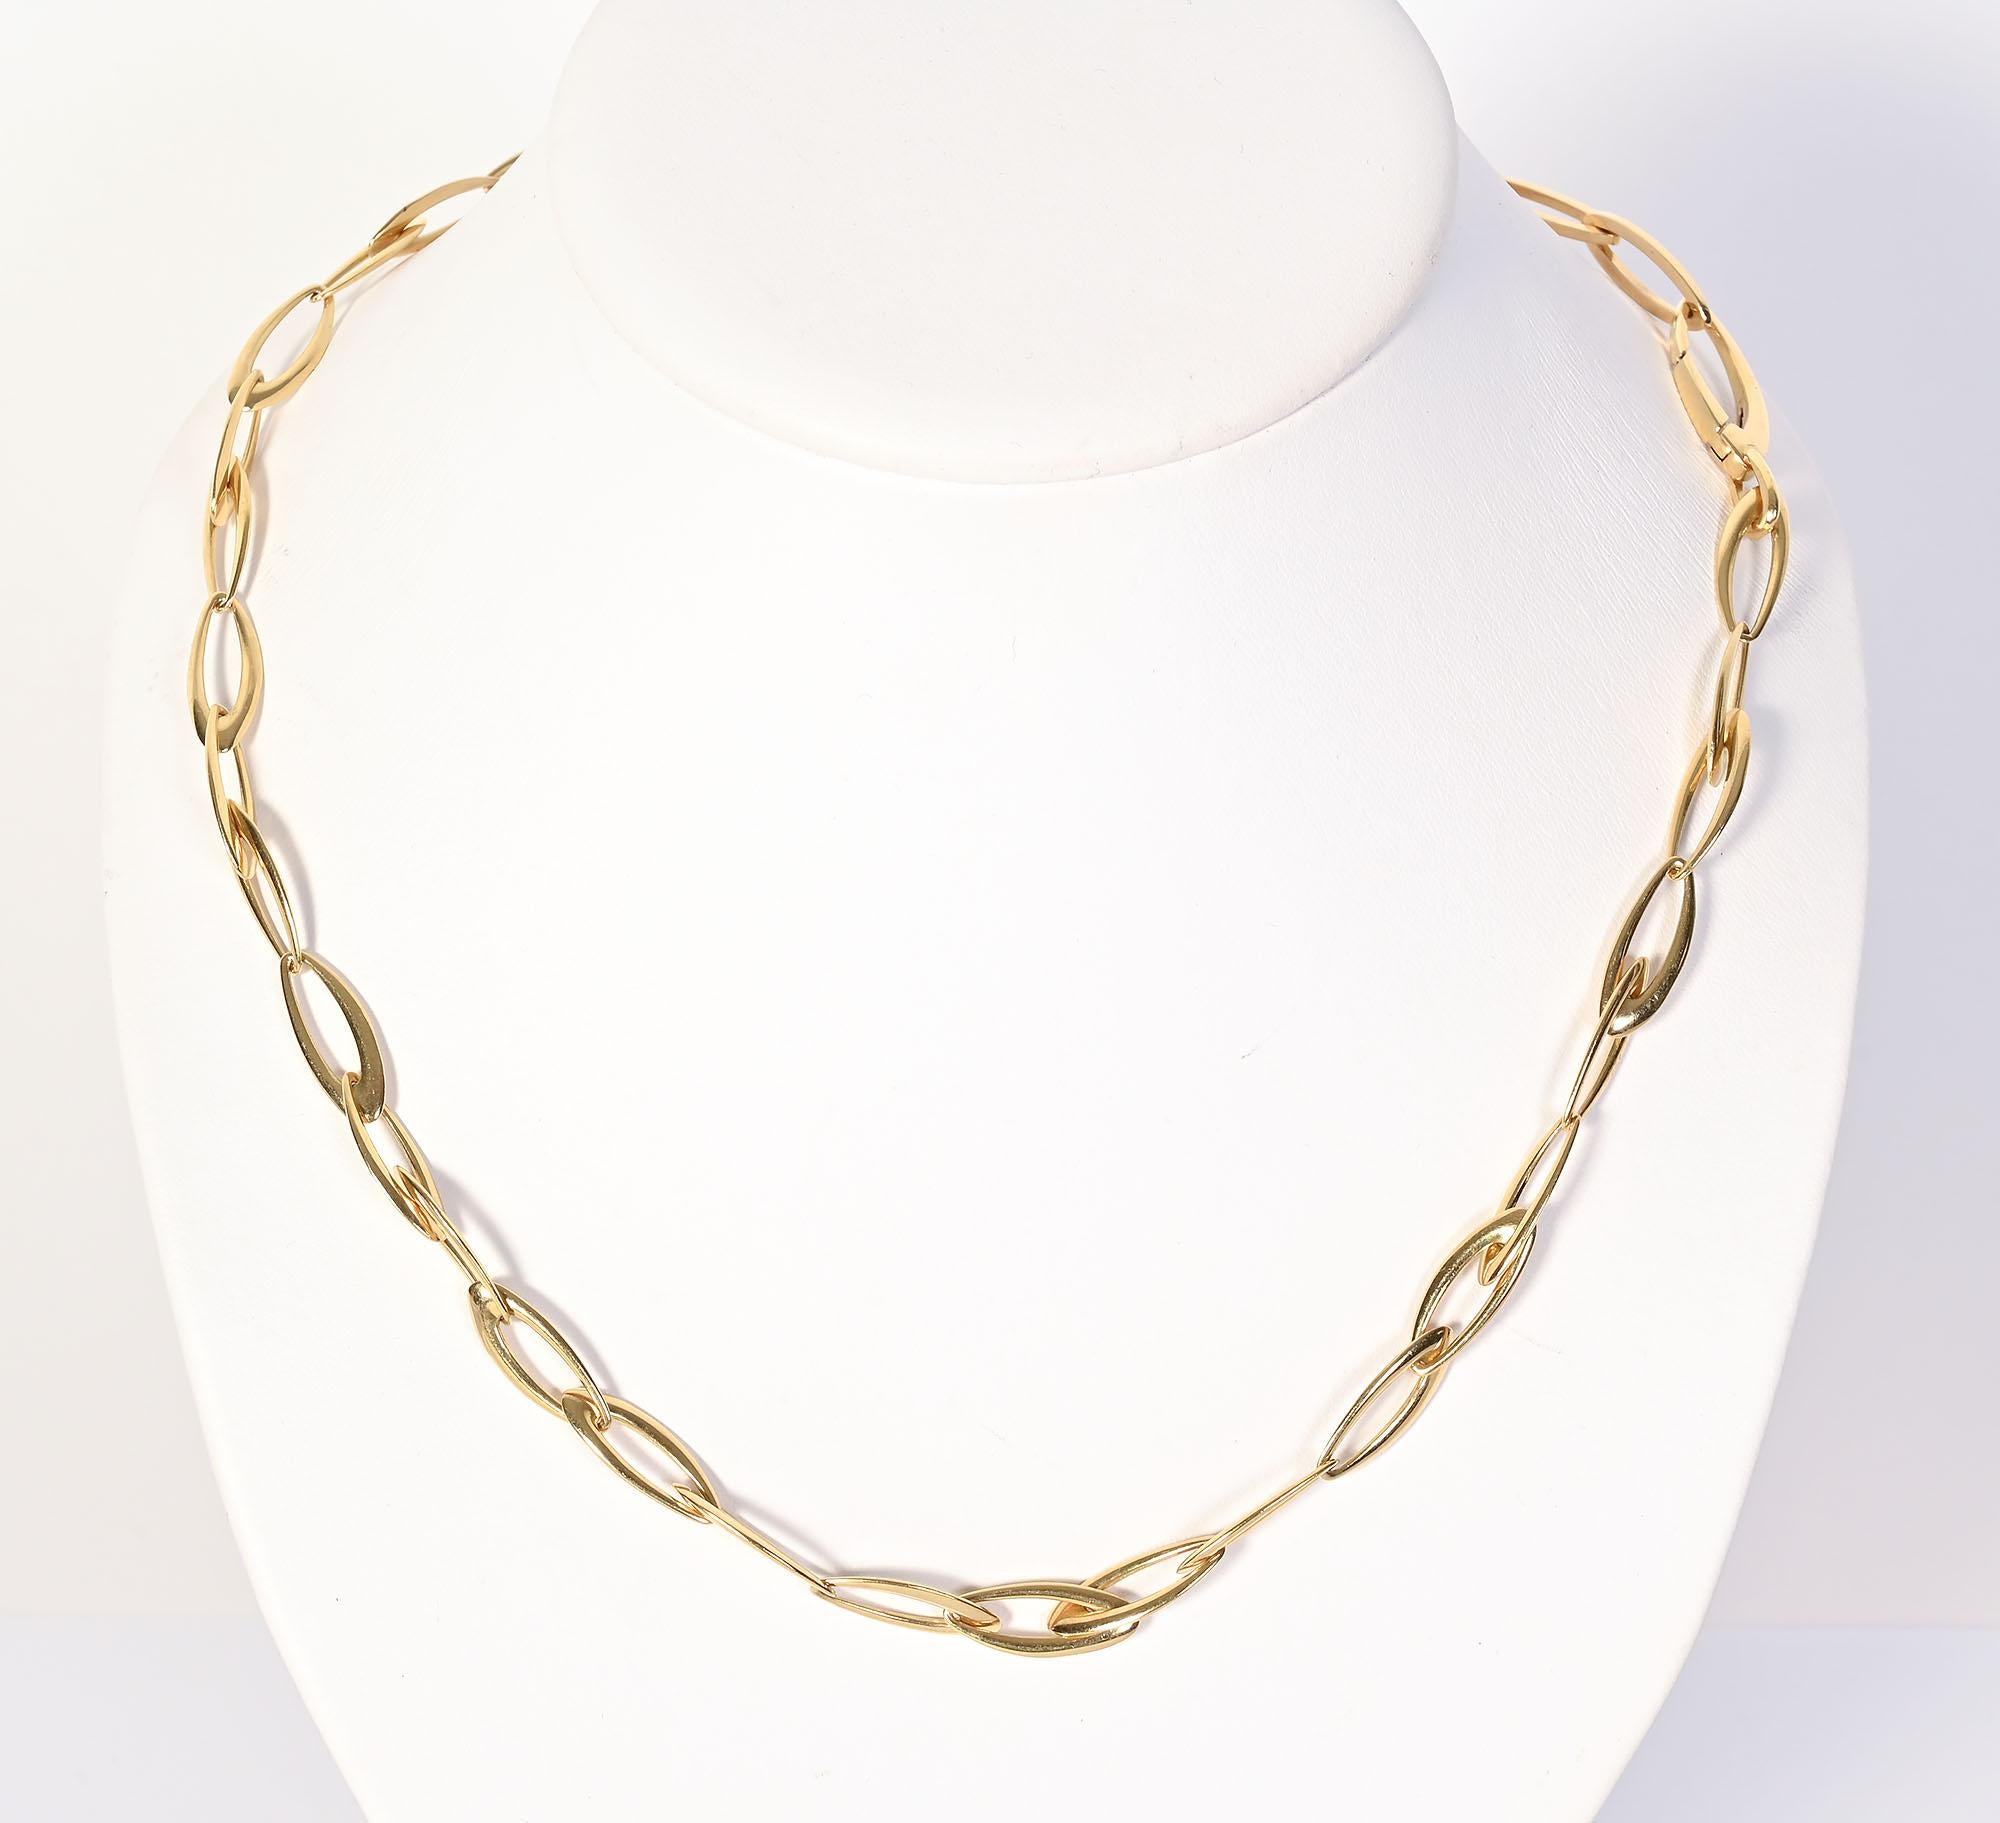 Versatile gold chain with navette shaped links that can be worn as either a 25 inch necklace; a 17 1/2 inch necklace  with or without an 8 1/2 inch bracelet. Three in one offers lots of possibilities. Eighteen karat gold; made by Superoro in Italy. 